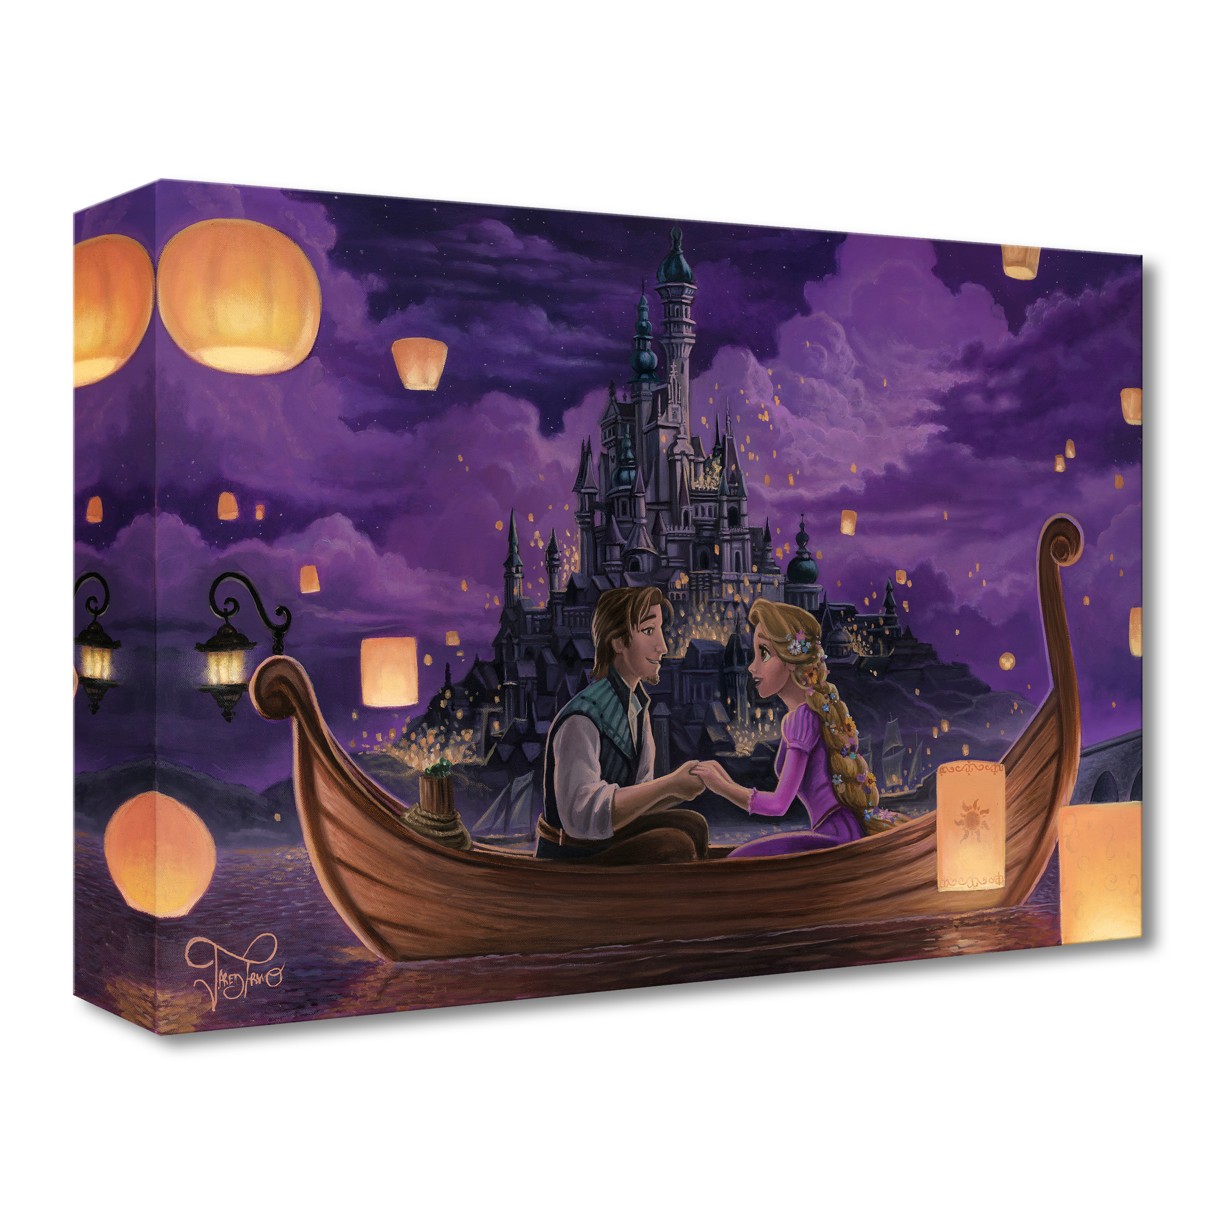 Tangled ''Festival of Lights'' Art by Jared Franco – Limited Edition